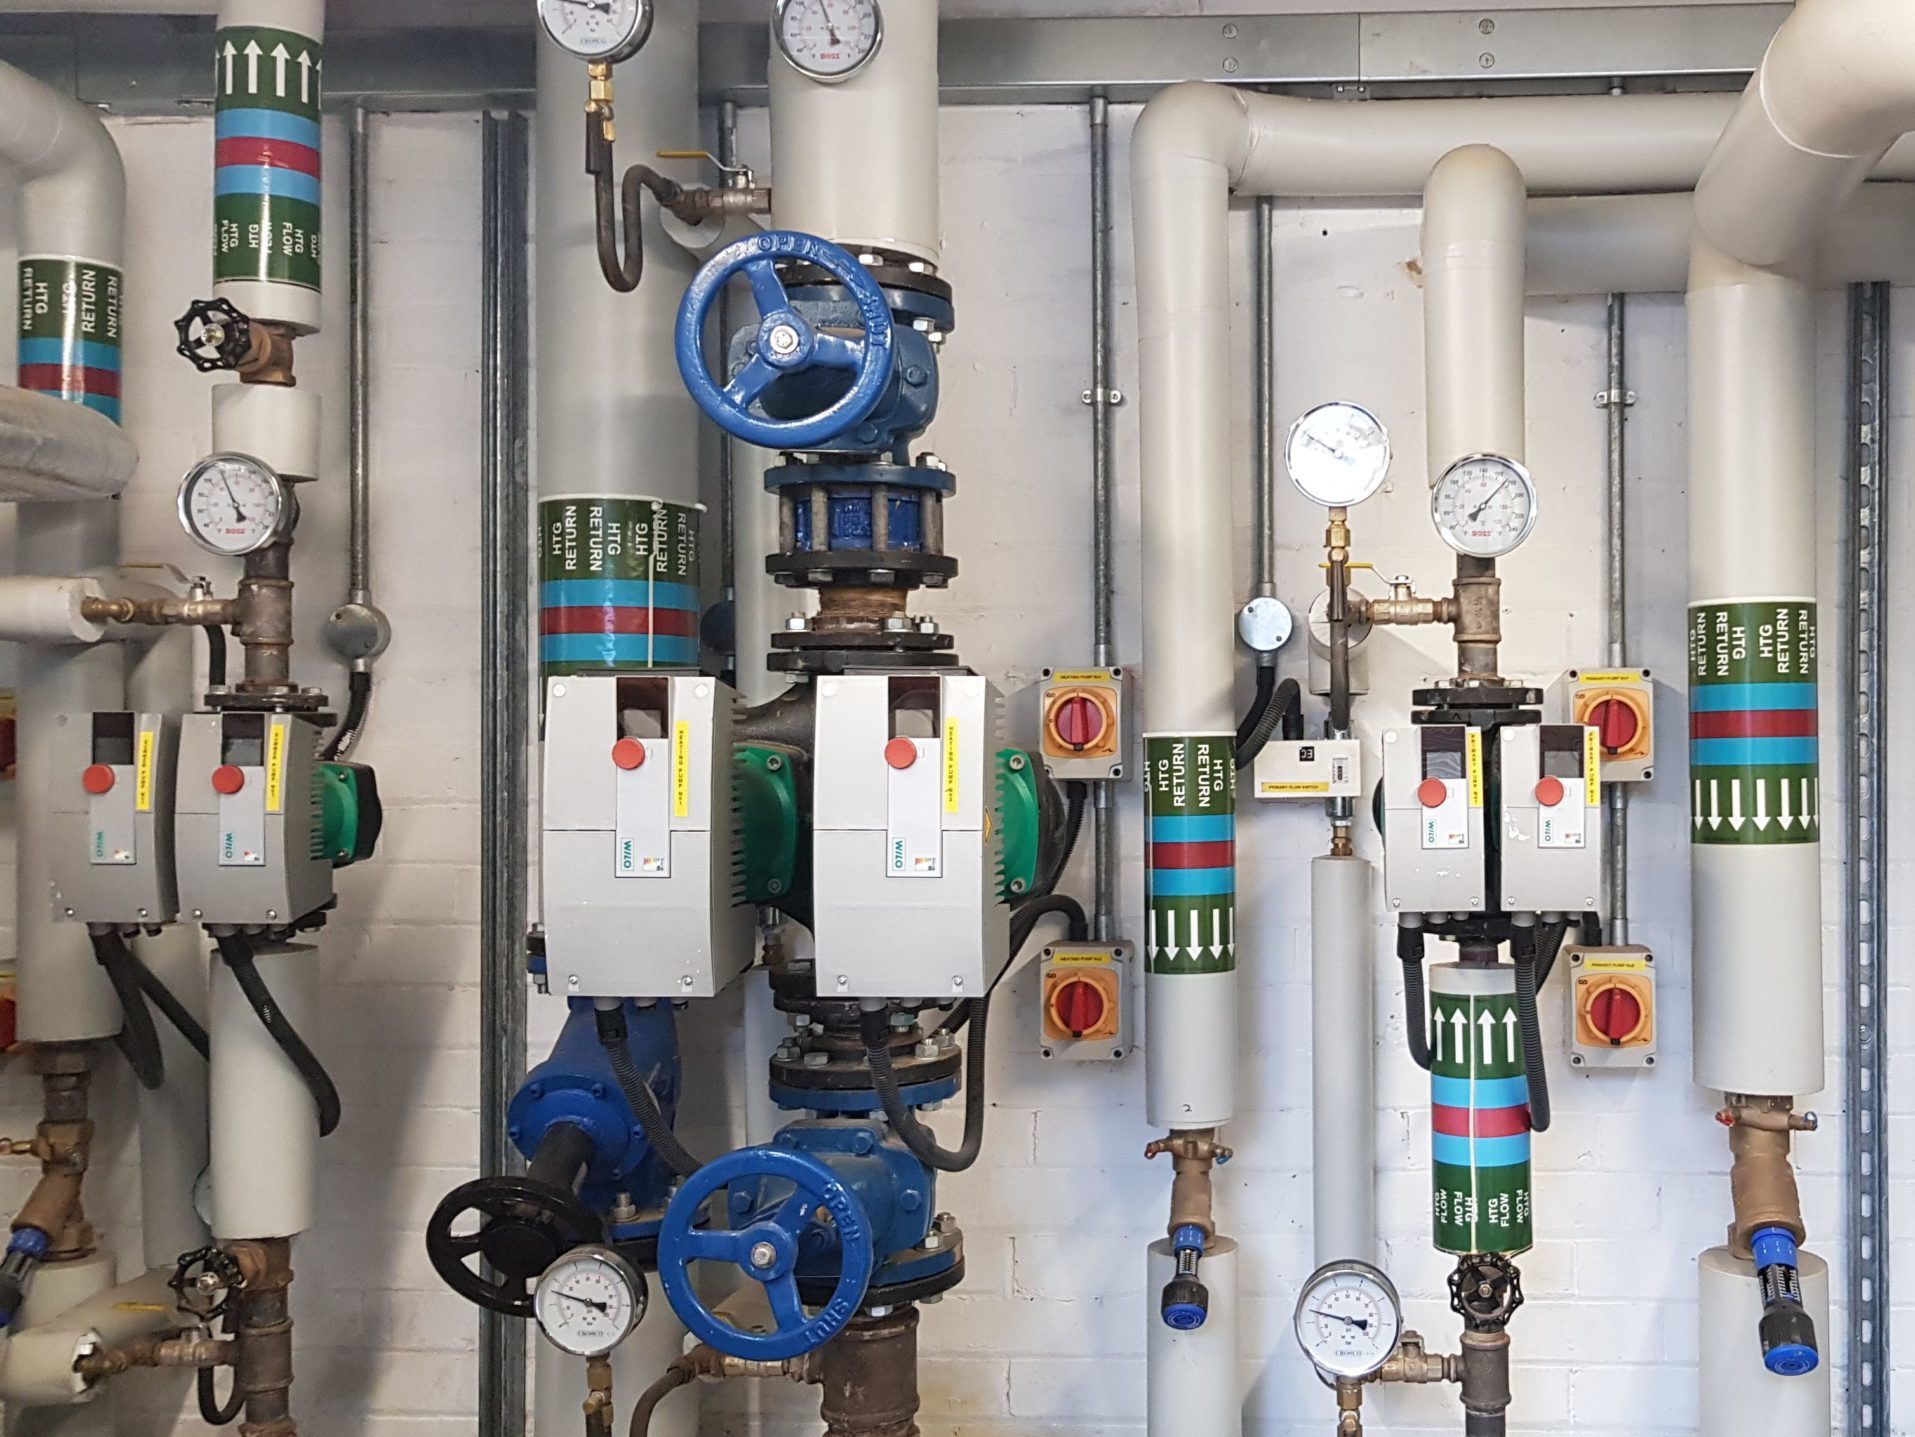 Energy efficient equipment installed in a plant room